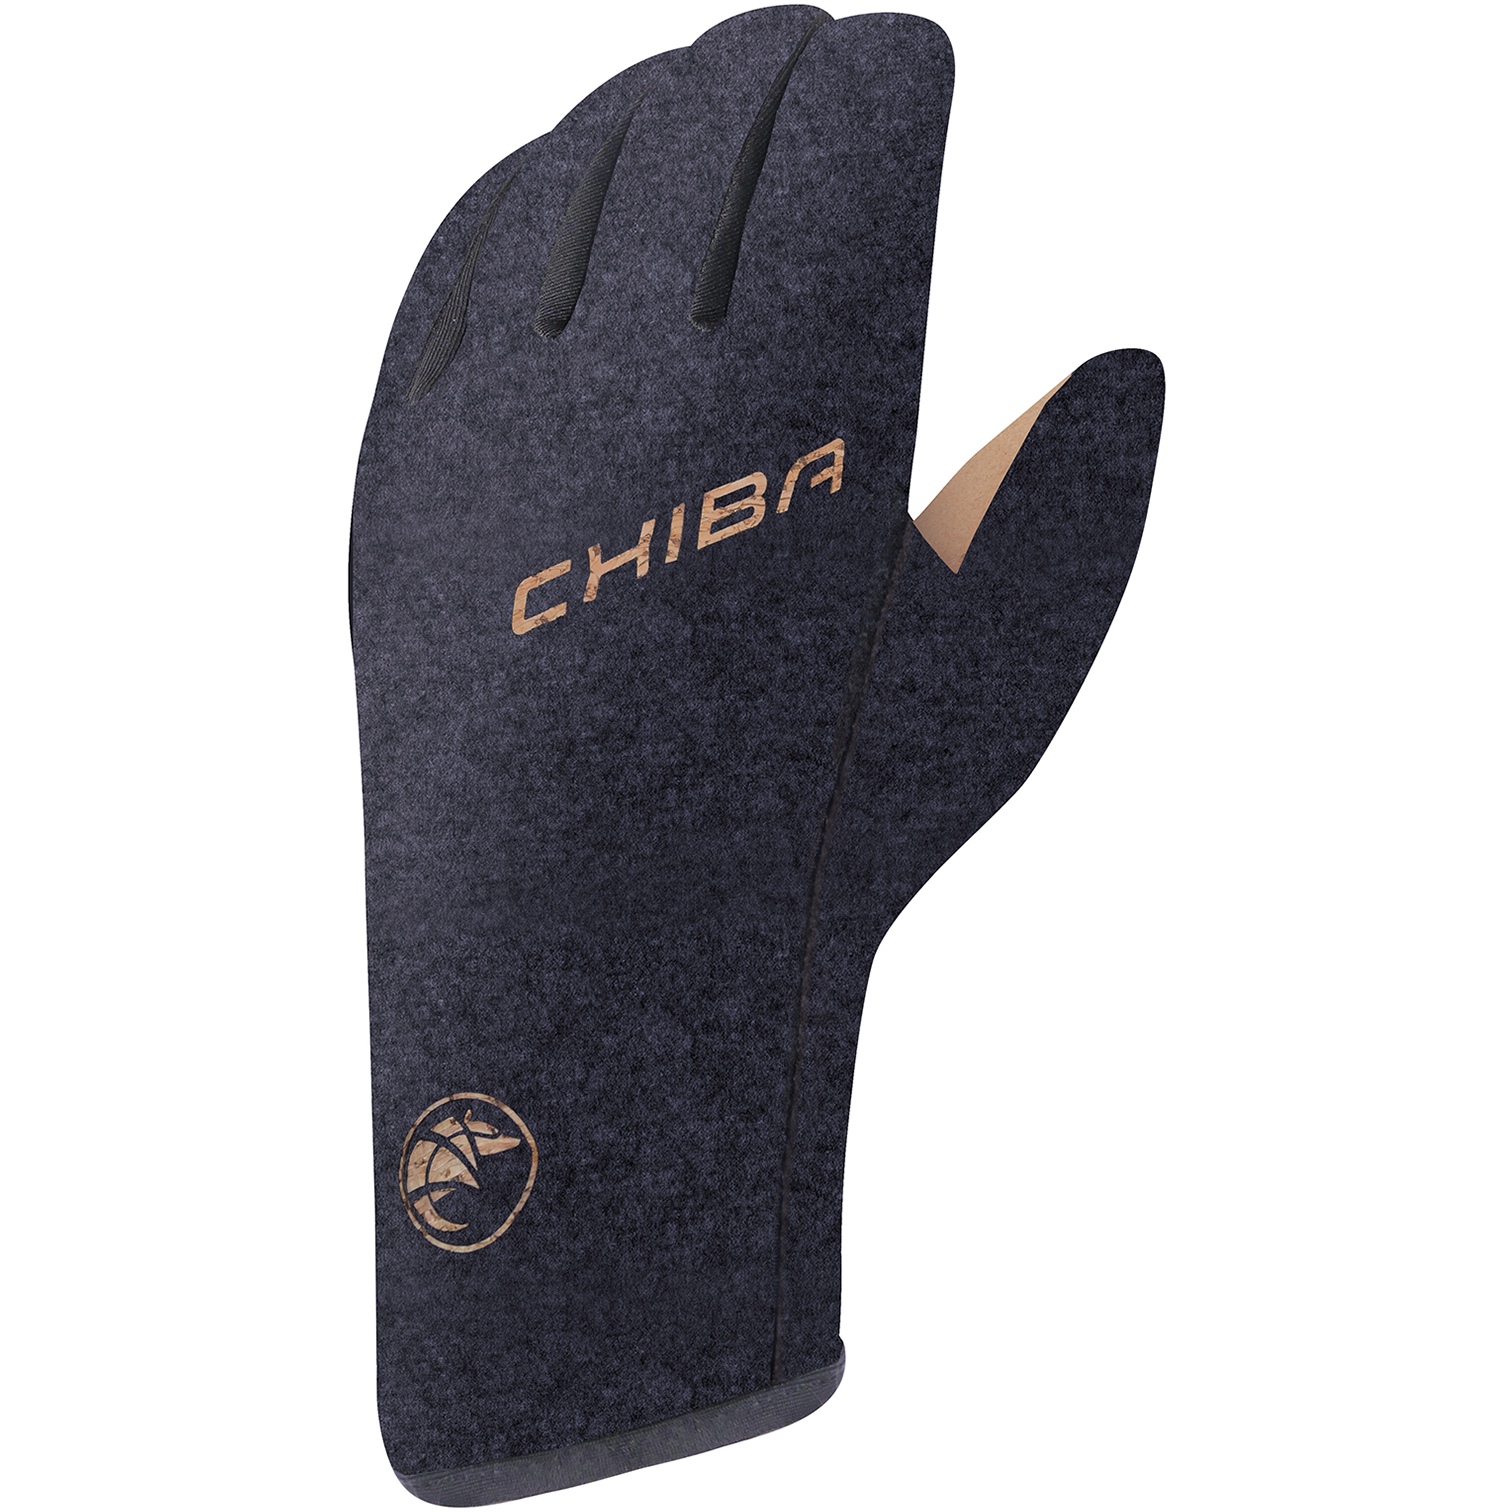 Picture of Chiba All Natural Light Cycling Gloves - black